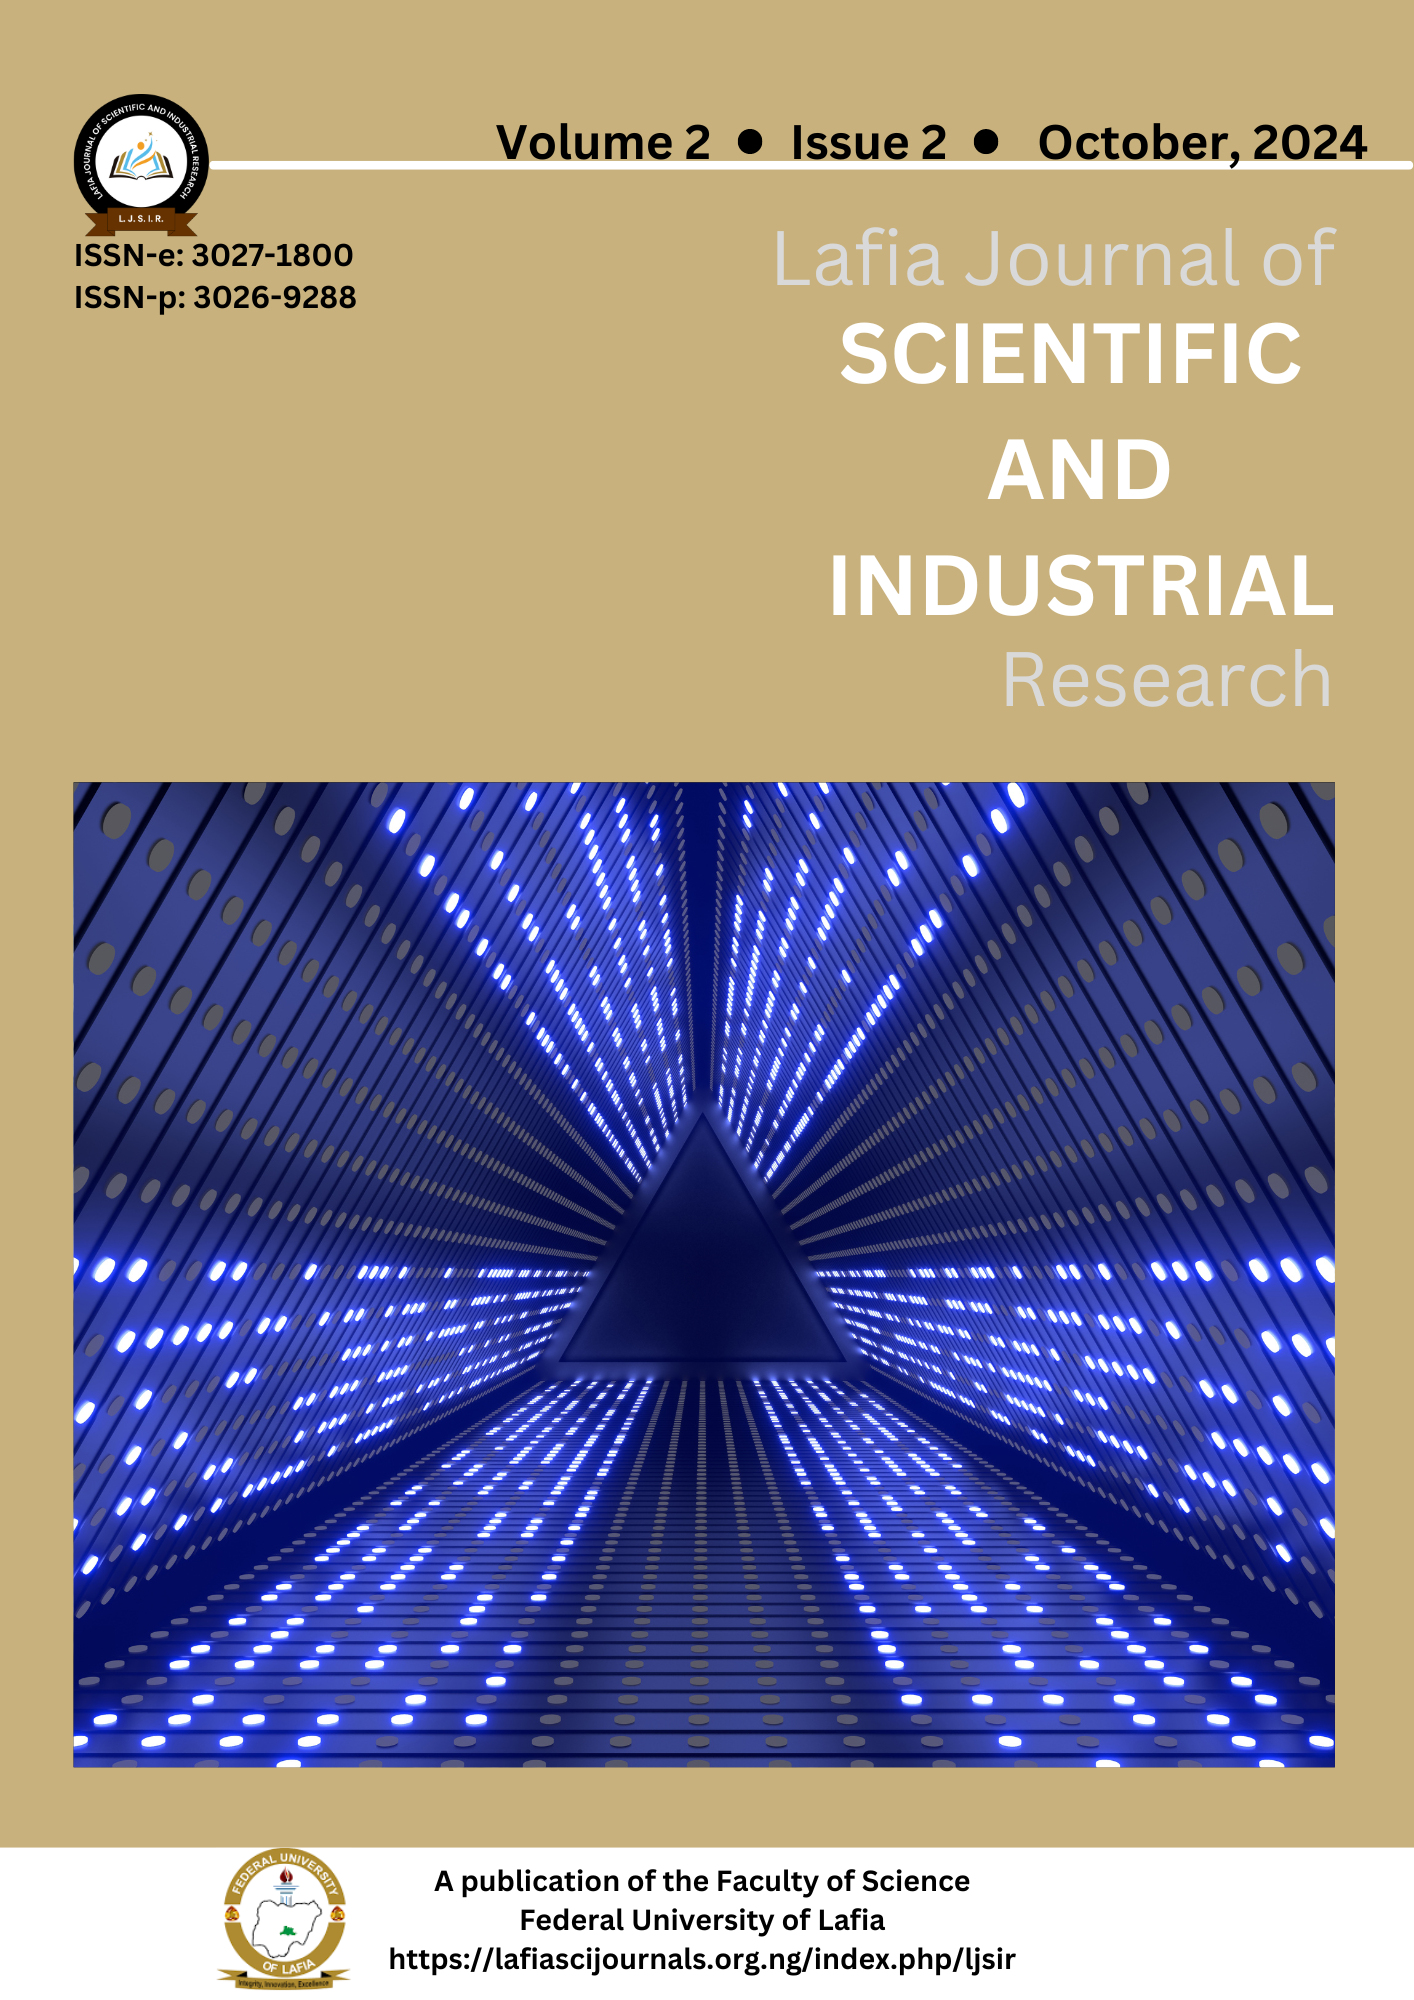 					View Volume 2, Issue 2 (October, 2024), Lafia Journal of Scientific and Industrial Research (LJSIR) [IN PROGRESS]
				